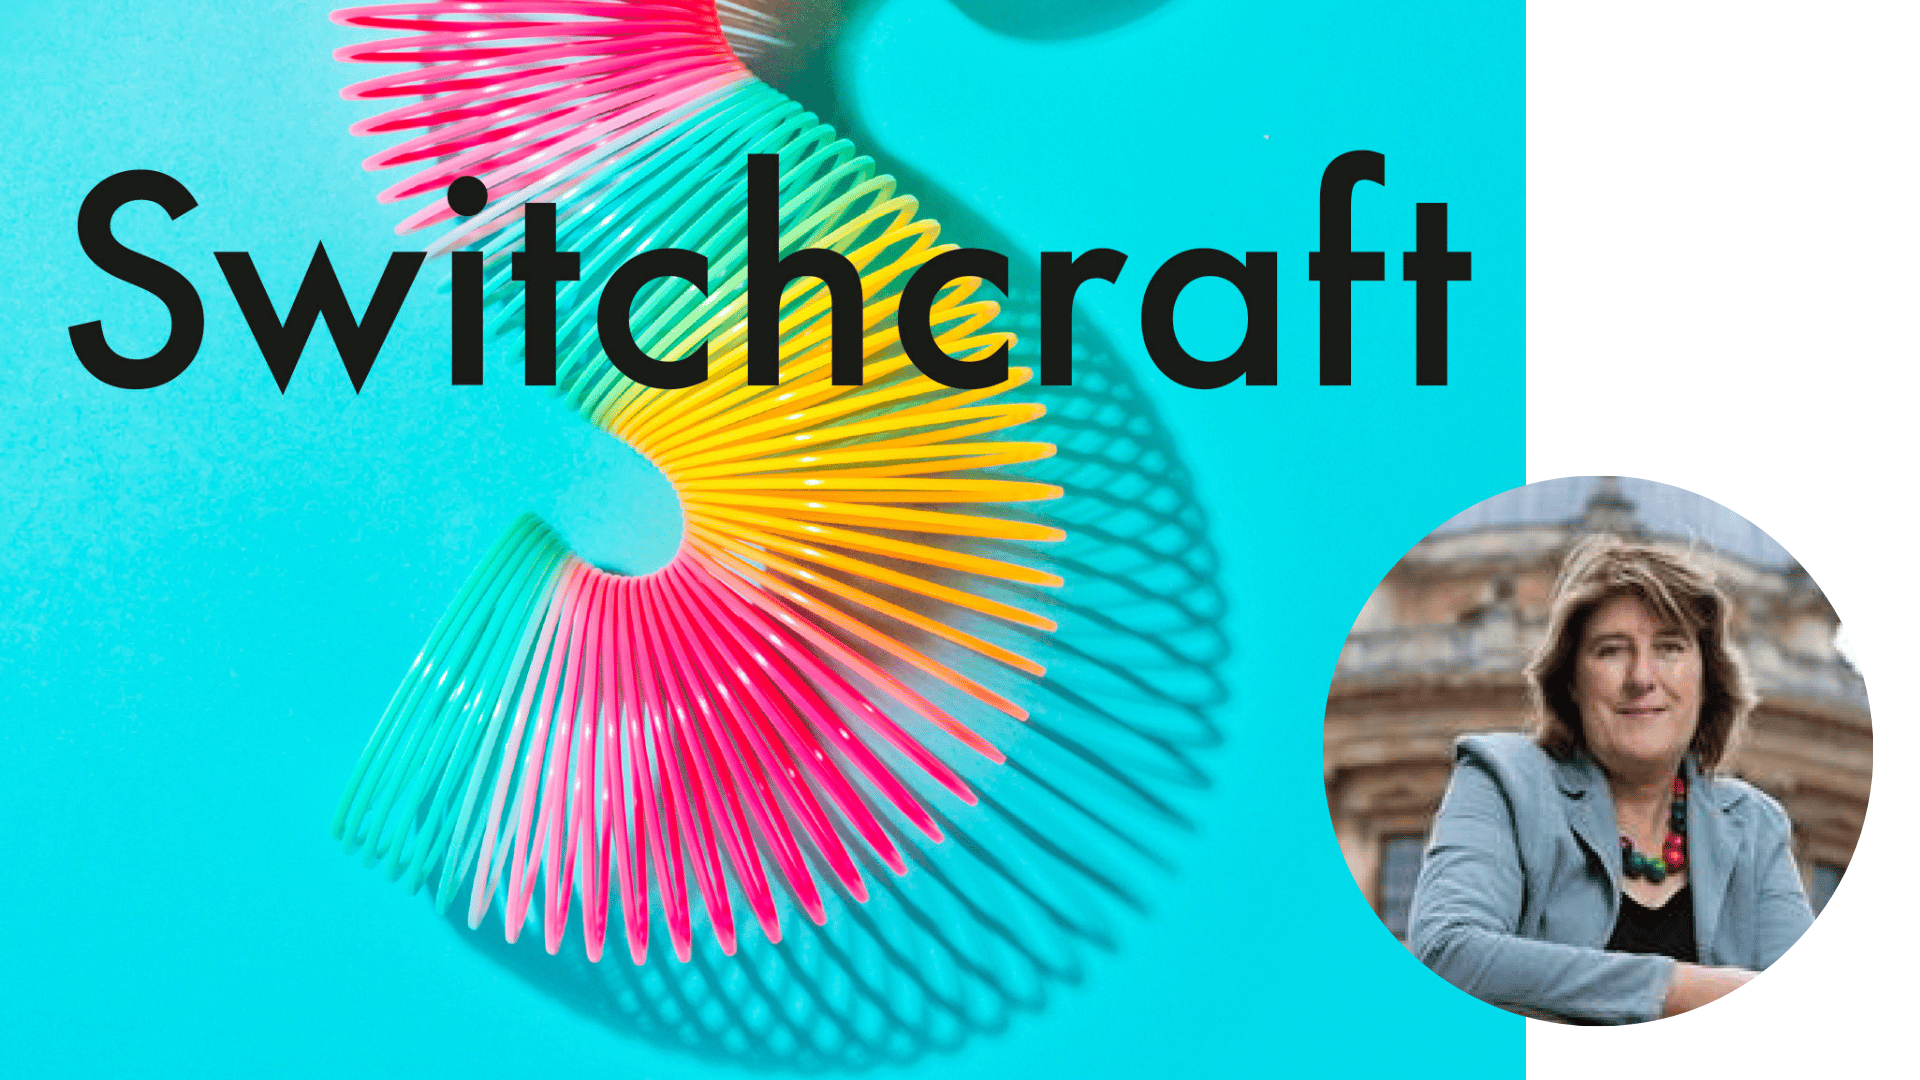 Featured image for “Elaine Fox – Switchcraft”